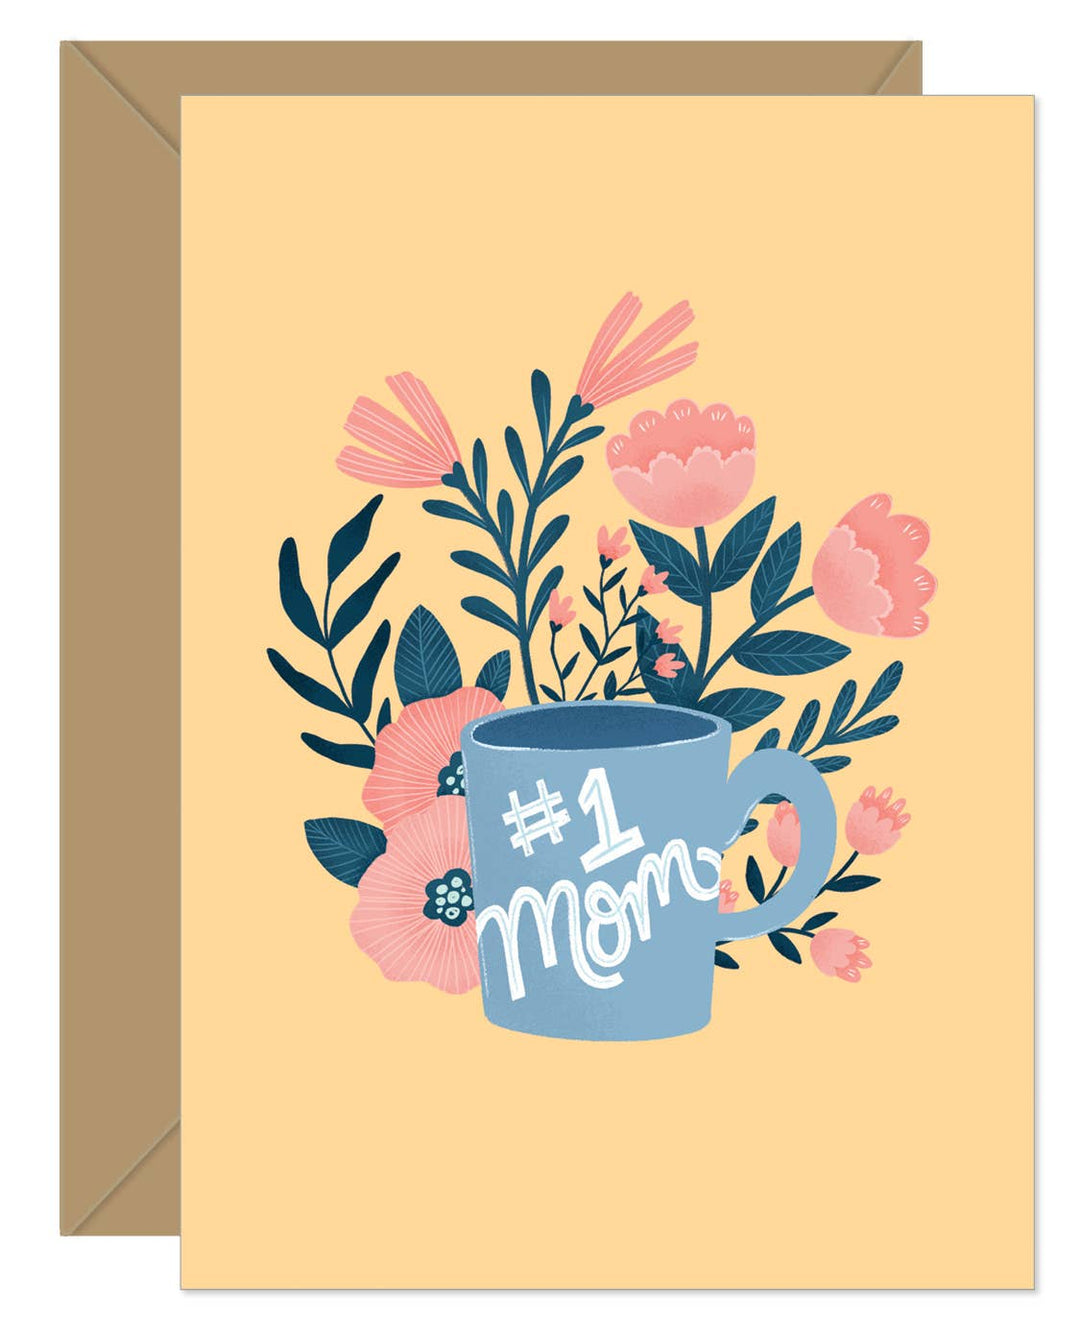 Hello Sweetie - # 1 Mom Mug Mother's Day Card